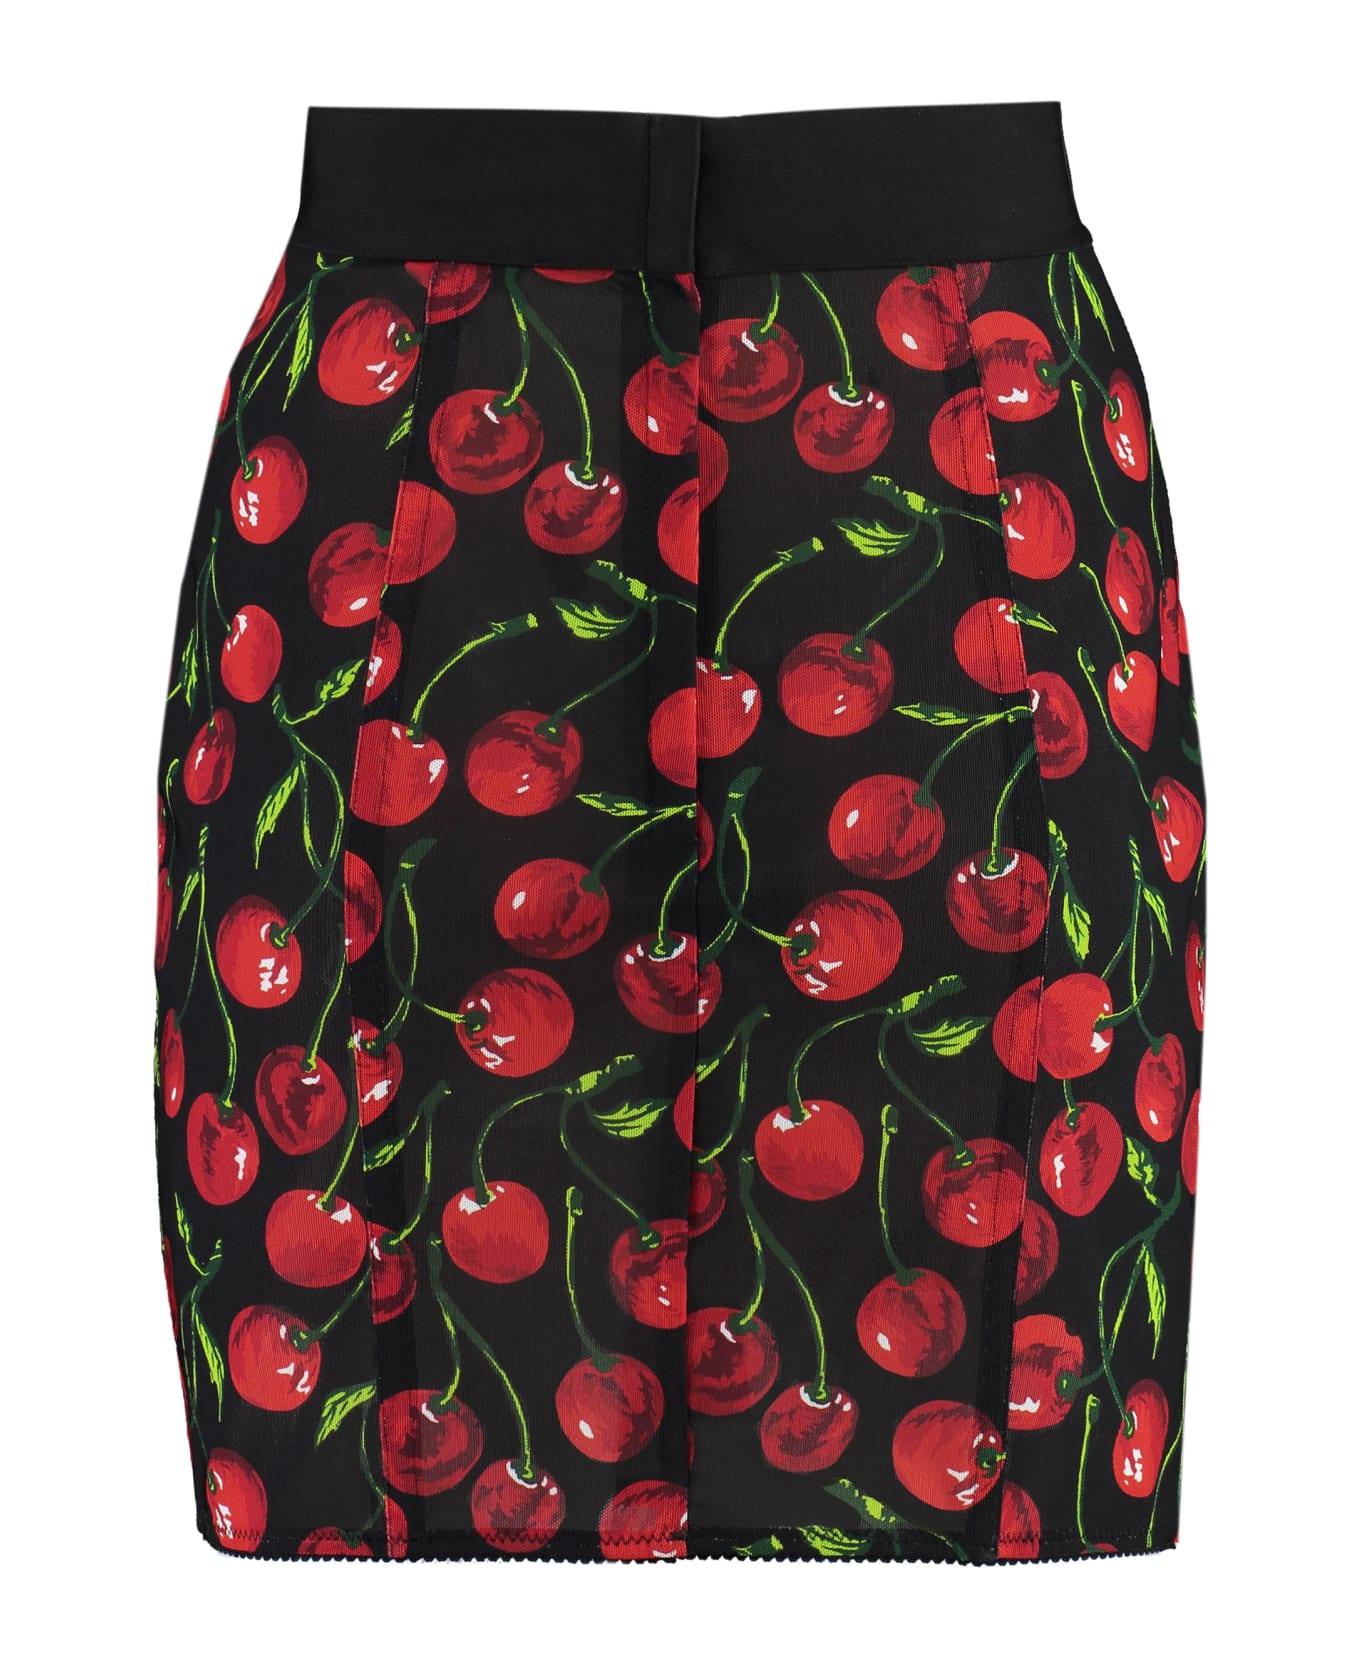 Dolce & Gabbana Mini-skirt With All-over Cherry Print - Multicolor